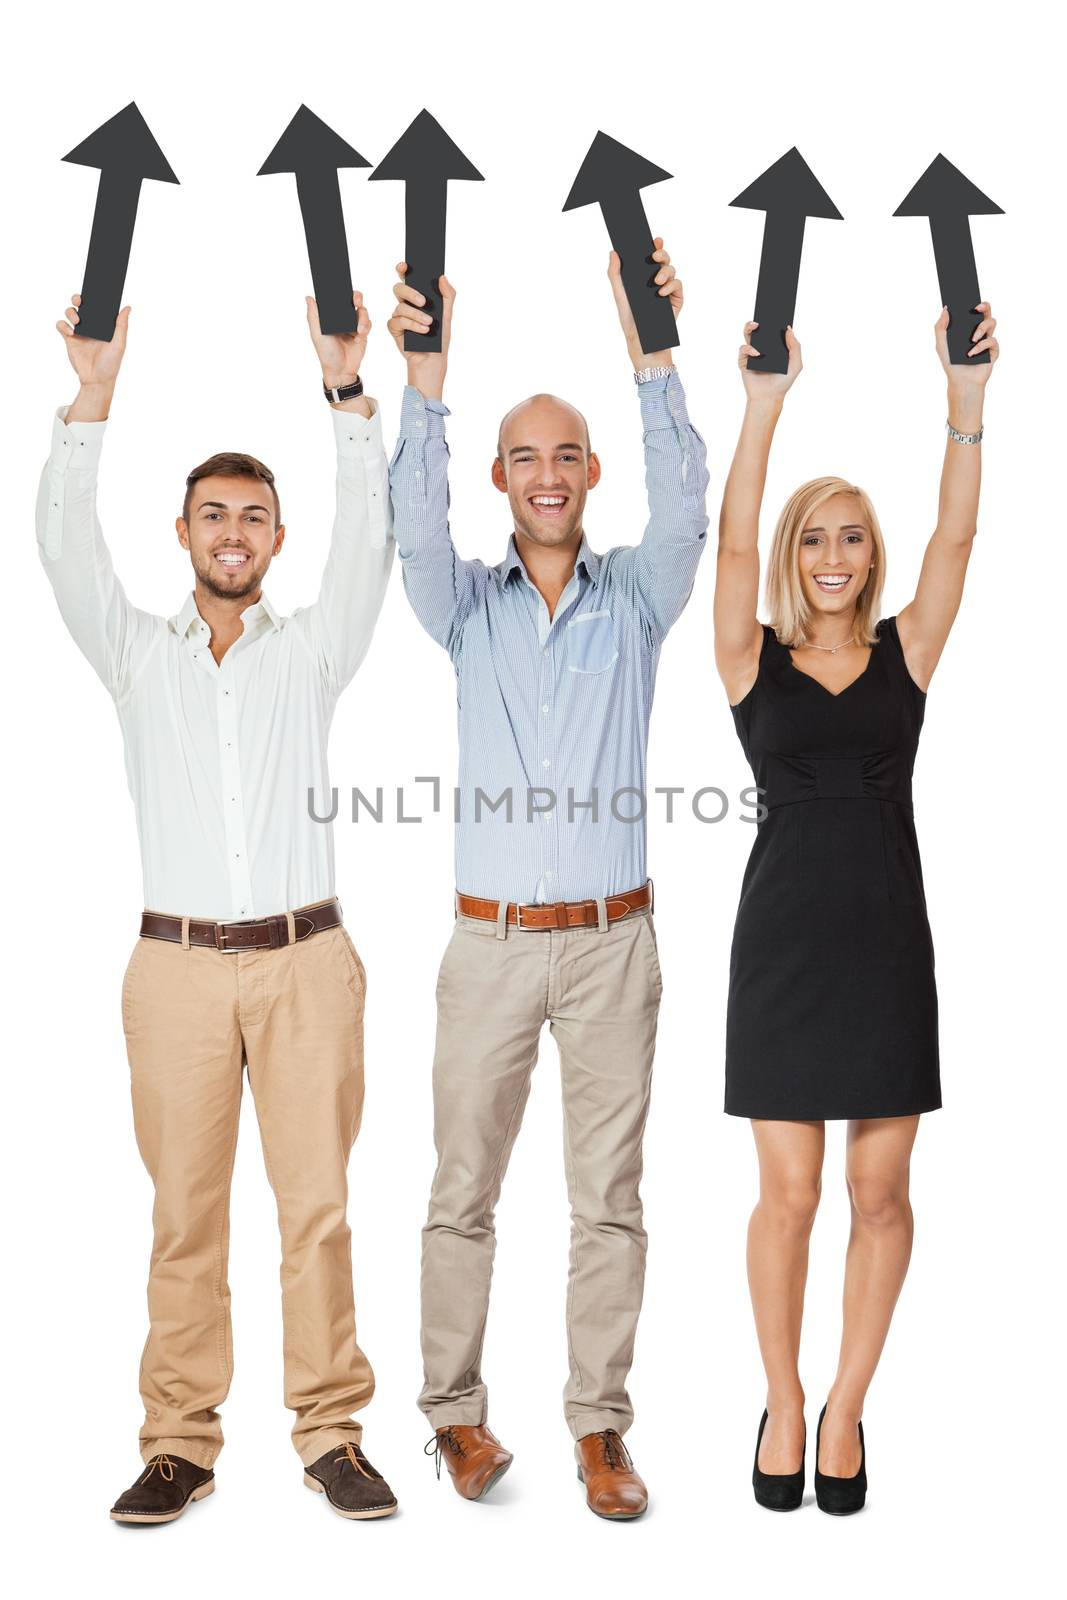 happy people showing up black arrows isolated  by juniart